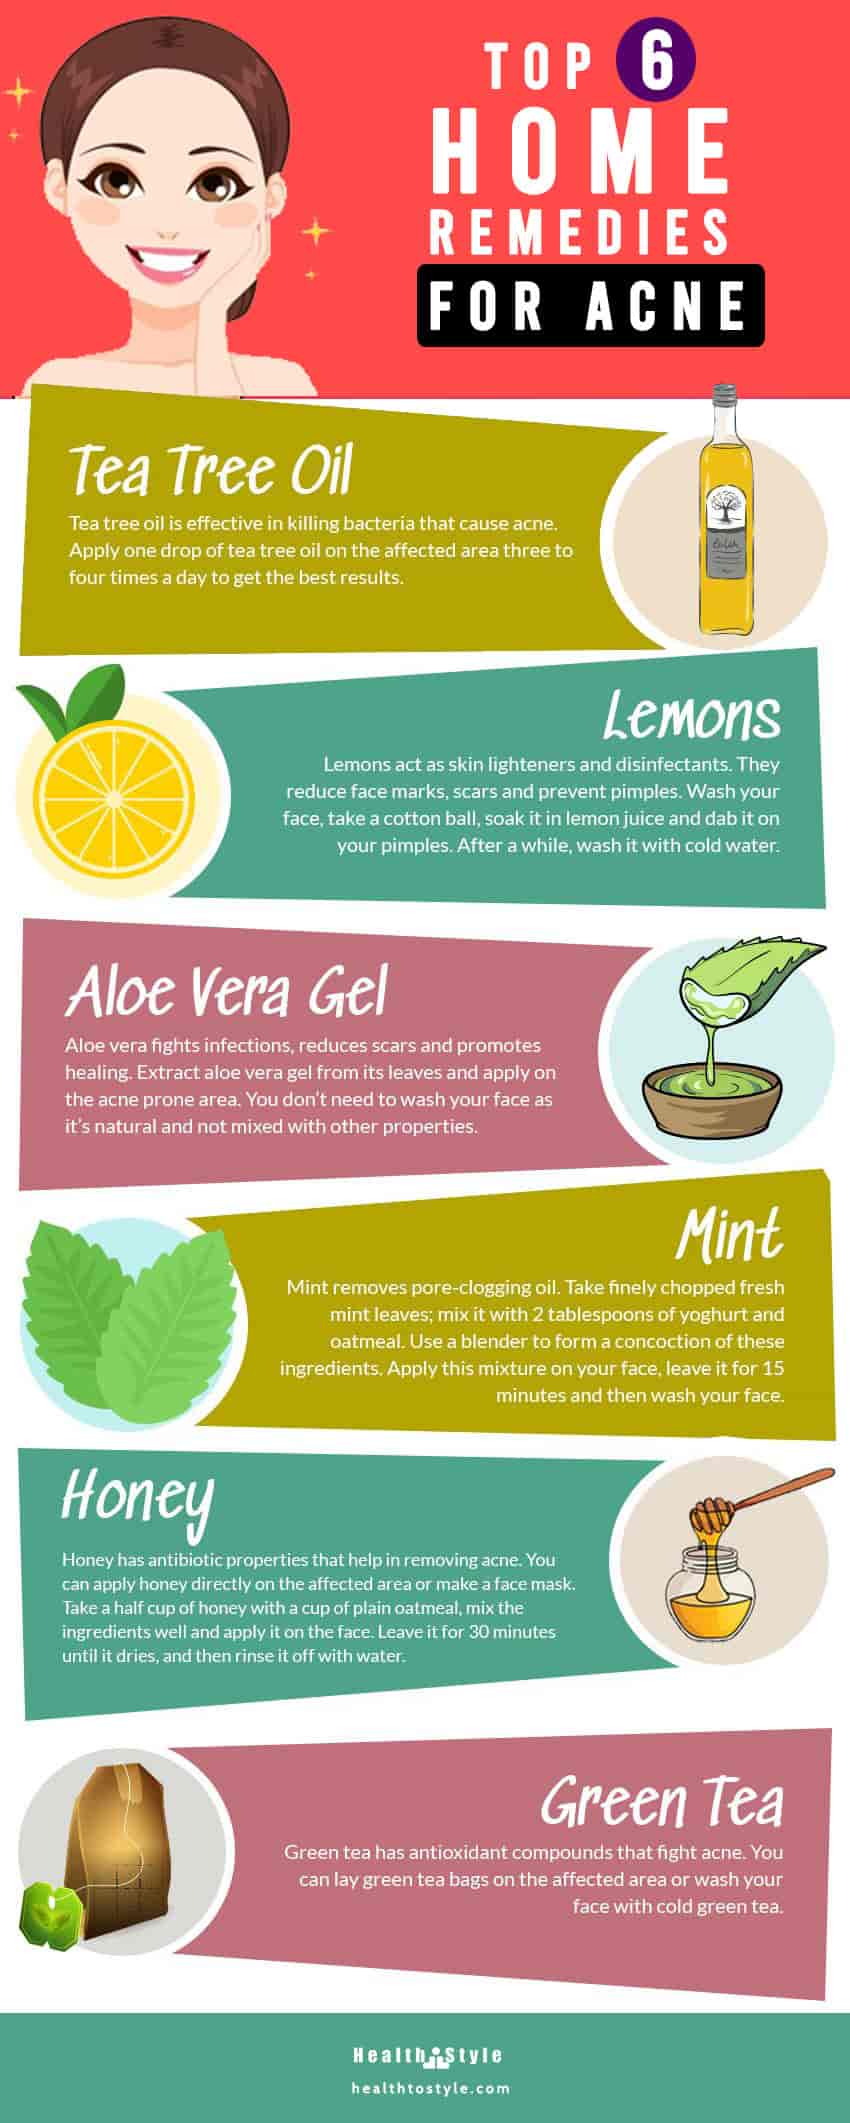 Home Remedies for Acne- infographic